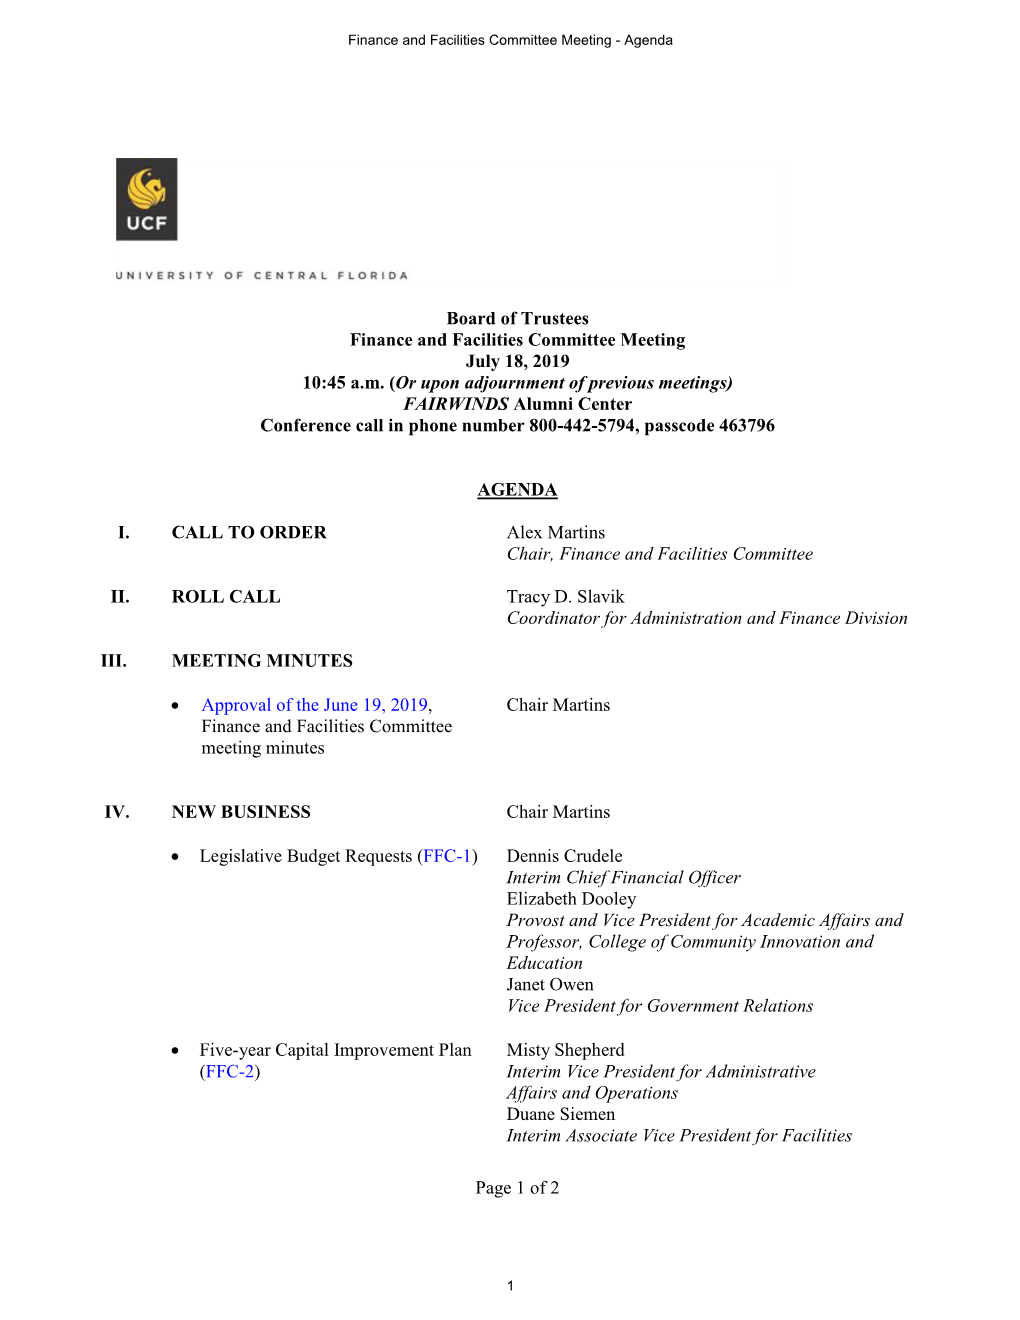 Page 1 of 2 Board of Trustees Finance and Facilities Committee Meeting July 18, 2019 10:45 A.M. (Or Upon Adjournment of Previous